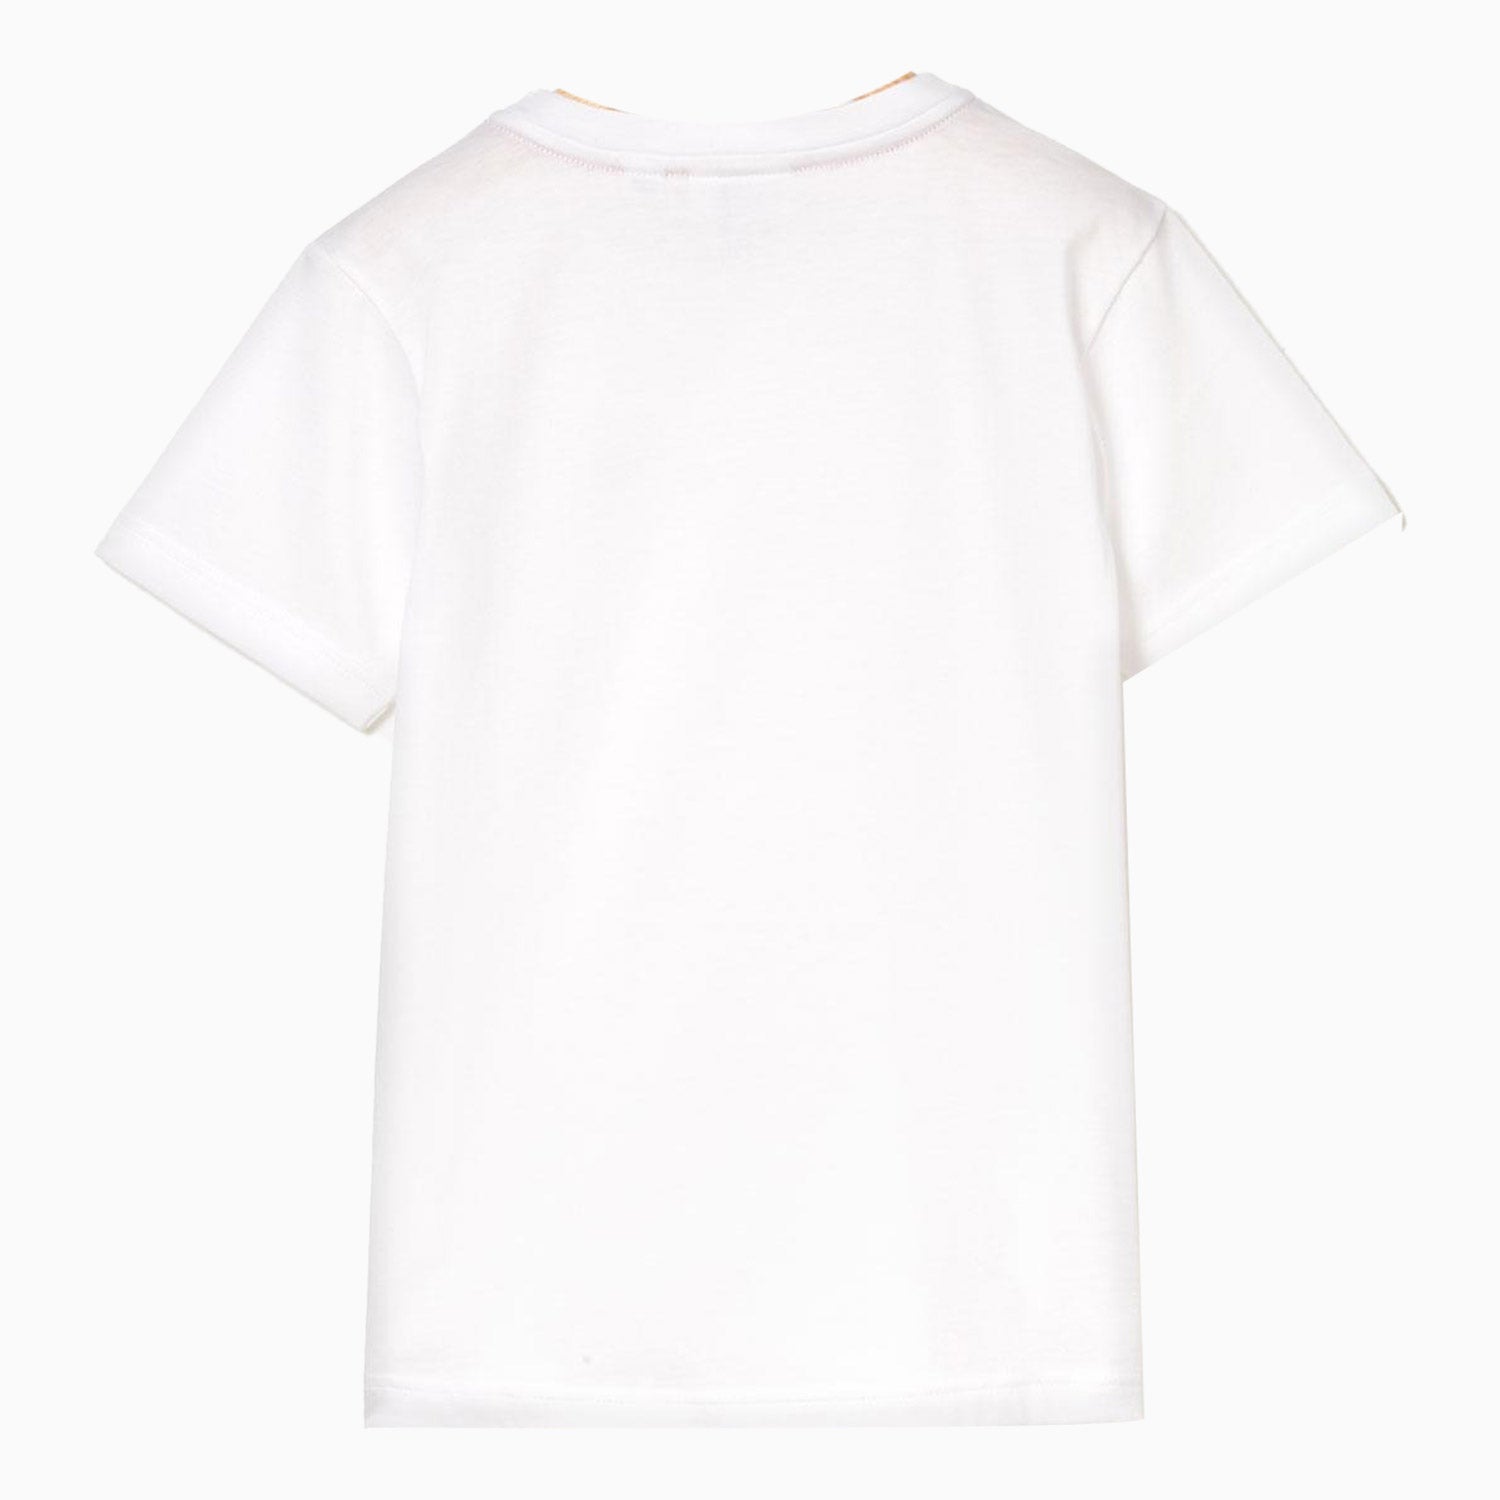 Lacoste Kid's Jersey T Shirt - Color: White - Kids Premium Clothing -